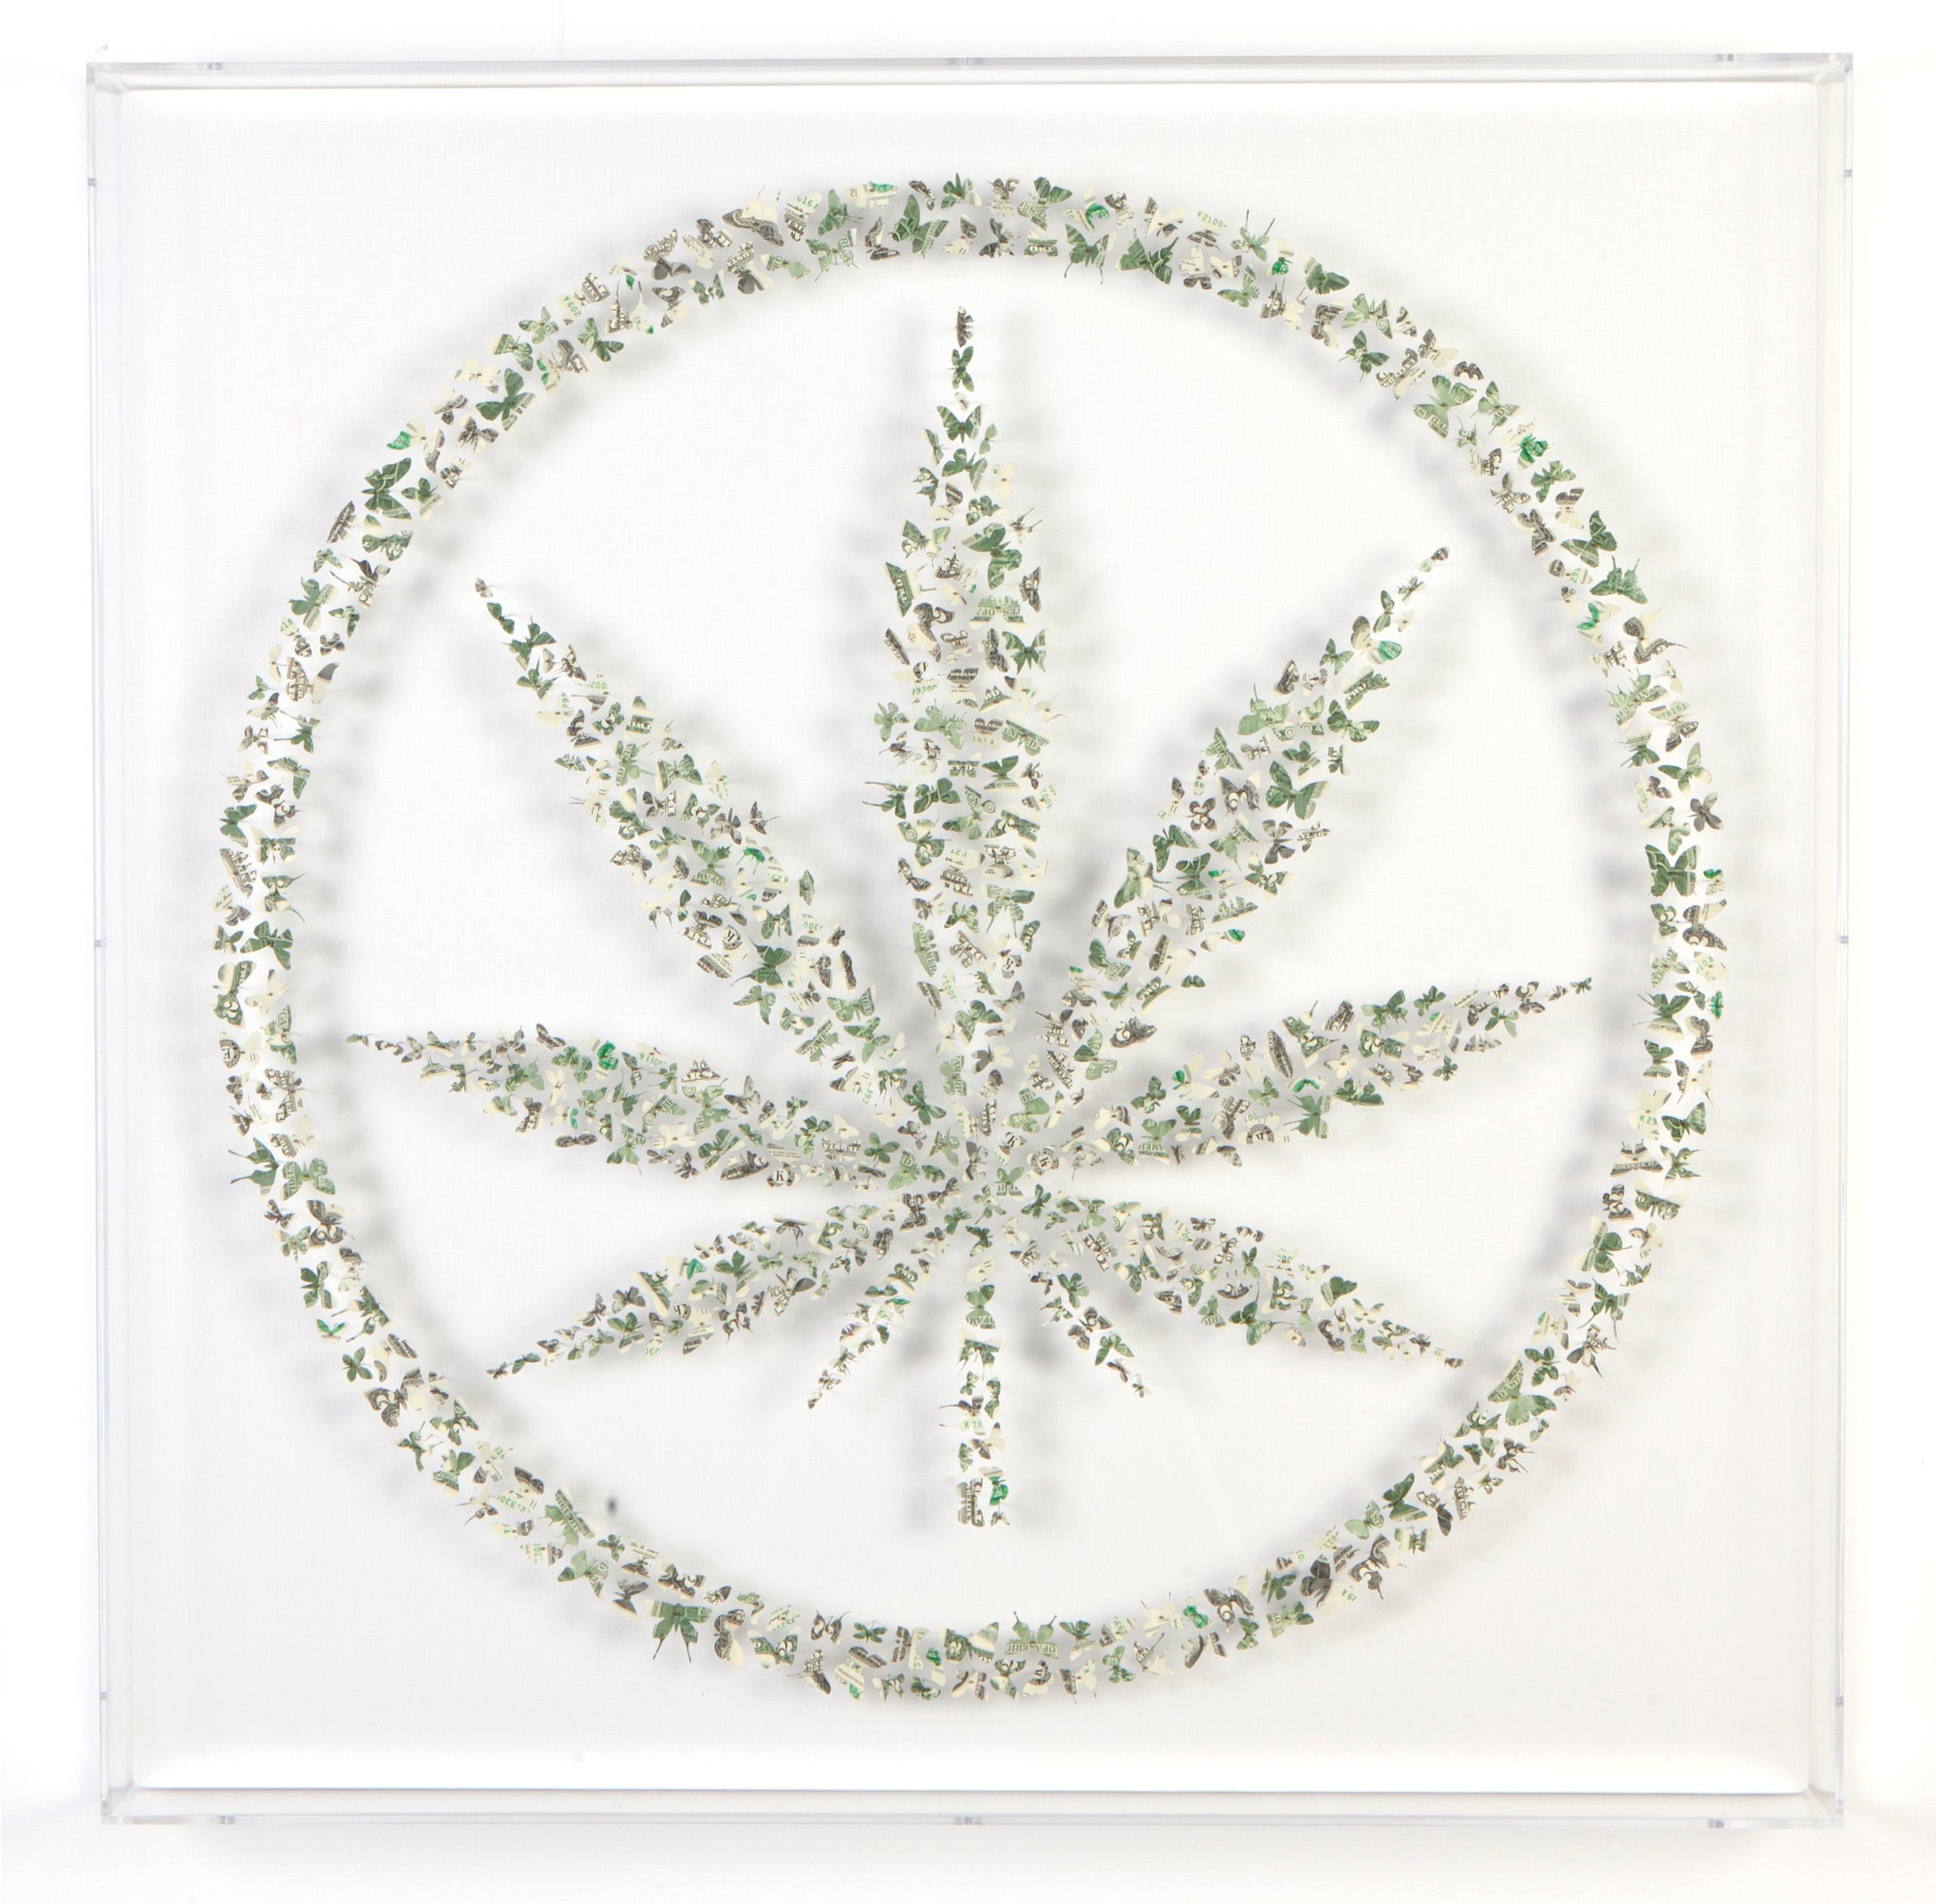 This work is sourced directly from the artist.
Butterflies cut from $2 bills, arranged in the shape of a pot leaf, and pinned with stainless steel entomology pins to canvas. Framed in a clear, plexiglass box.

Available Sizes (Framed Size)
Standard